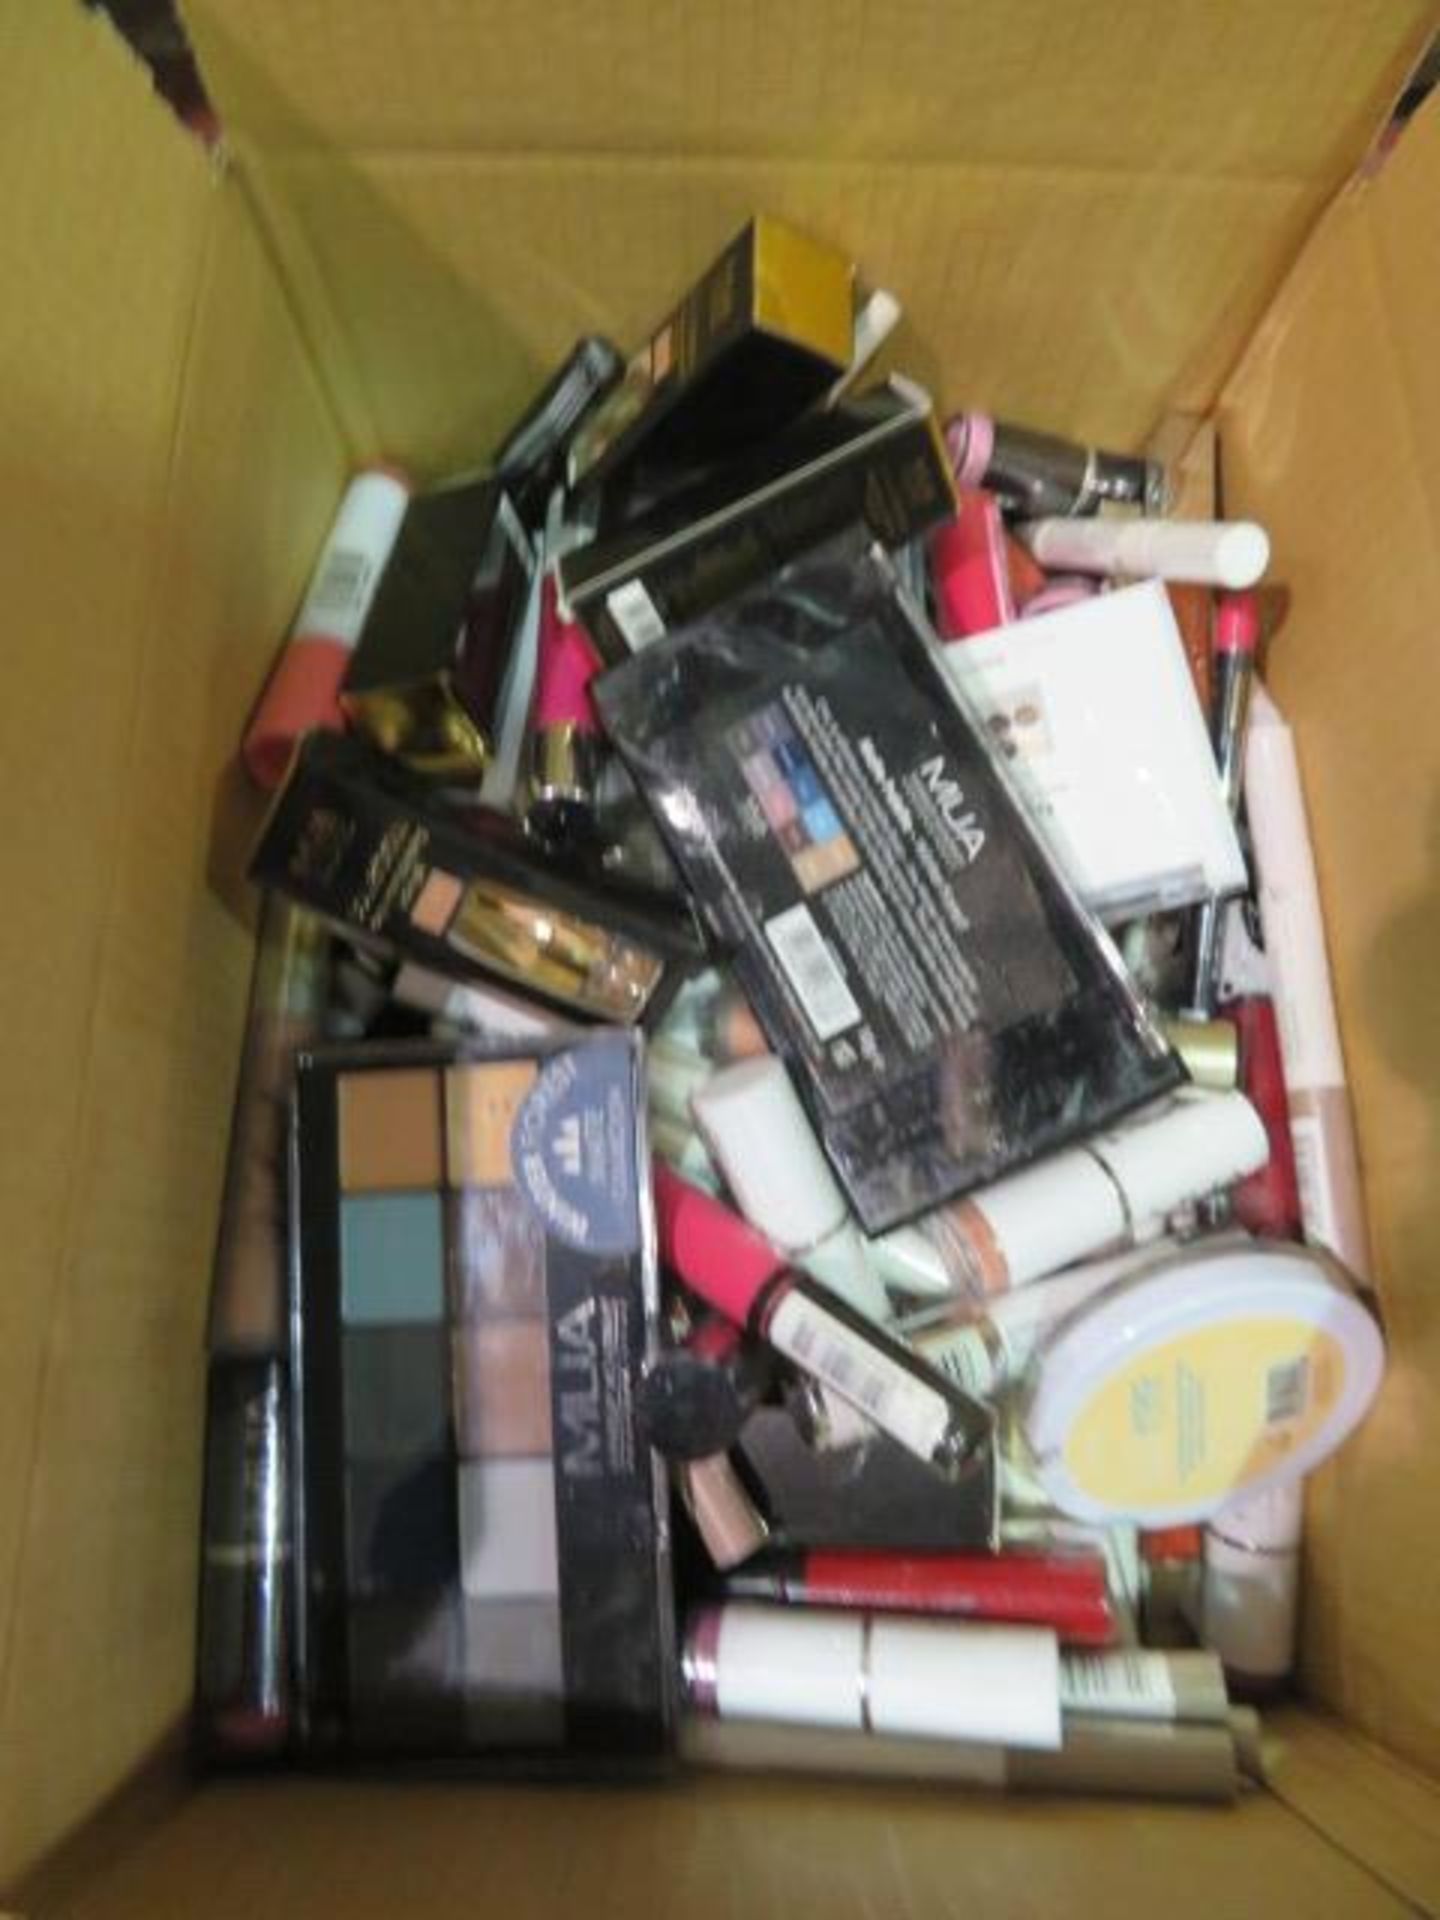 (Z45) Circa. 200 items of various new make up acadamy make up to include: skin define hydro pow...